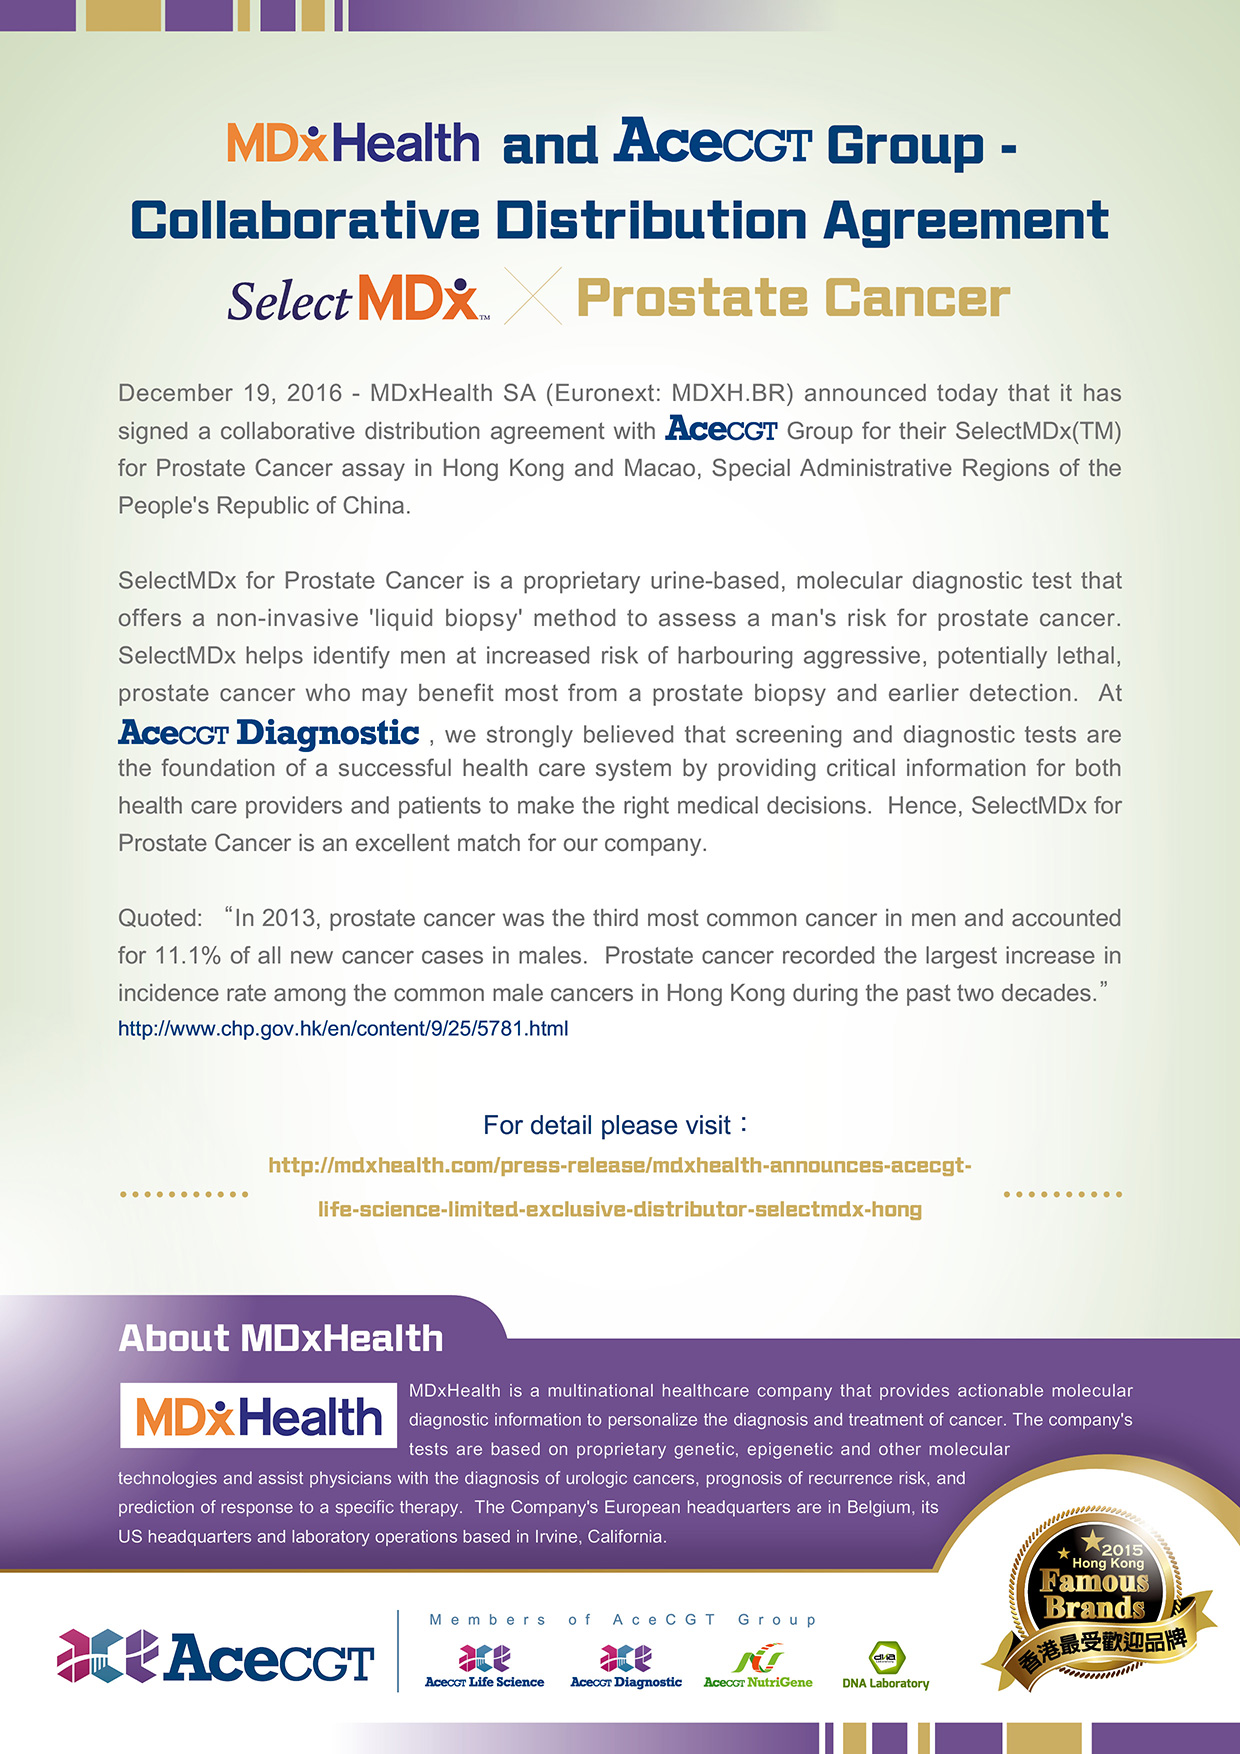 MDxHealth and AceCGT Group - Collaborative Distribution Agreement - SelectMDx for Prostate Cancer - December 19, 2016 - MDxHealth SA (Euronext: MDXH.BR) announced today that it has signed a collaborative distribution agreement with AceCGT Group for their SelectMDx(TM) for Prostate Cancer assay in Hong Kong and Macao, Special Administrative Regions of the People's Republic of China. SelectMDx for Prostate Cancer is a proprietary urine-based, molecular diagnostic test that offers a non-invasive 'liquid biopsy' method to assess a man's risk for prostate cancer.  SelectMDx helps identify men at increased risk of harbouring aggressive, potentially lethal, prostate cancer who may benefit most from a prostate biopsy and earlier detection.  At AceCGT Diagnostic, we strongly believed that screening and diagnostic tests are the foundation of a successful health care system by providing critical information for both health care providers and patients to make the right medical decisions.  Hence, SelectMDx for Prostate Cancer is an excellent match for our company. Quoted:'In 2013, prostate cancer was the third most common cancer in men and accounted for 11.1% of all new cancer cases in males.  Prostate cancer recorded the largest increase in incidence rate among the common male cancers in Hong Kong during the past two decades.'http://www.chp.gov.hk/en/content/9/25/5781.html. For detail please visit: http://mdxhealth.com/press-release/mdxhealth-announces-acecgt-life-science-limited-exclusive-distributor-selectmdx-hong. About MDxHealth - MDxHealth is a multinational healthcare company that provides actionable molecular diagnostic information to personalize the diagnosis and treatment of cancer. The company's tests are based on proprietary genetic, epigenetic and other molecular technologies and assist physicians with the diagnosis of urologic cancers, prognosis of recurrence risk, and prediction of response to a specific therapy.  The Company's European headquarters are in Belgium, its US headquarters and laboratory operations based in Irvine, California.